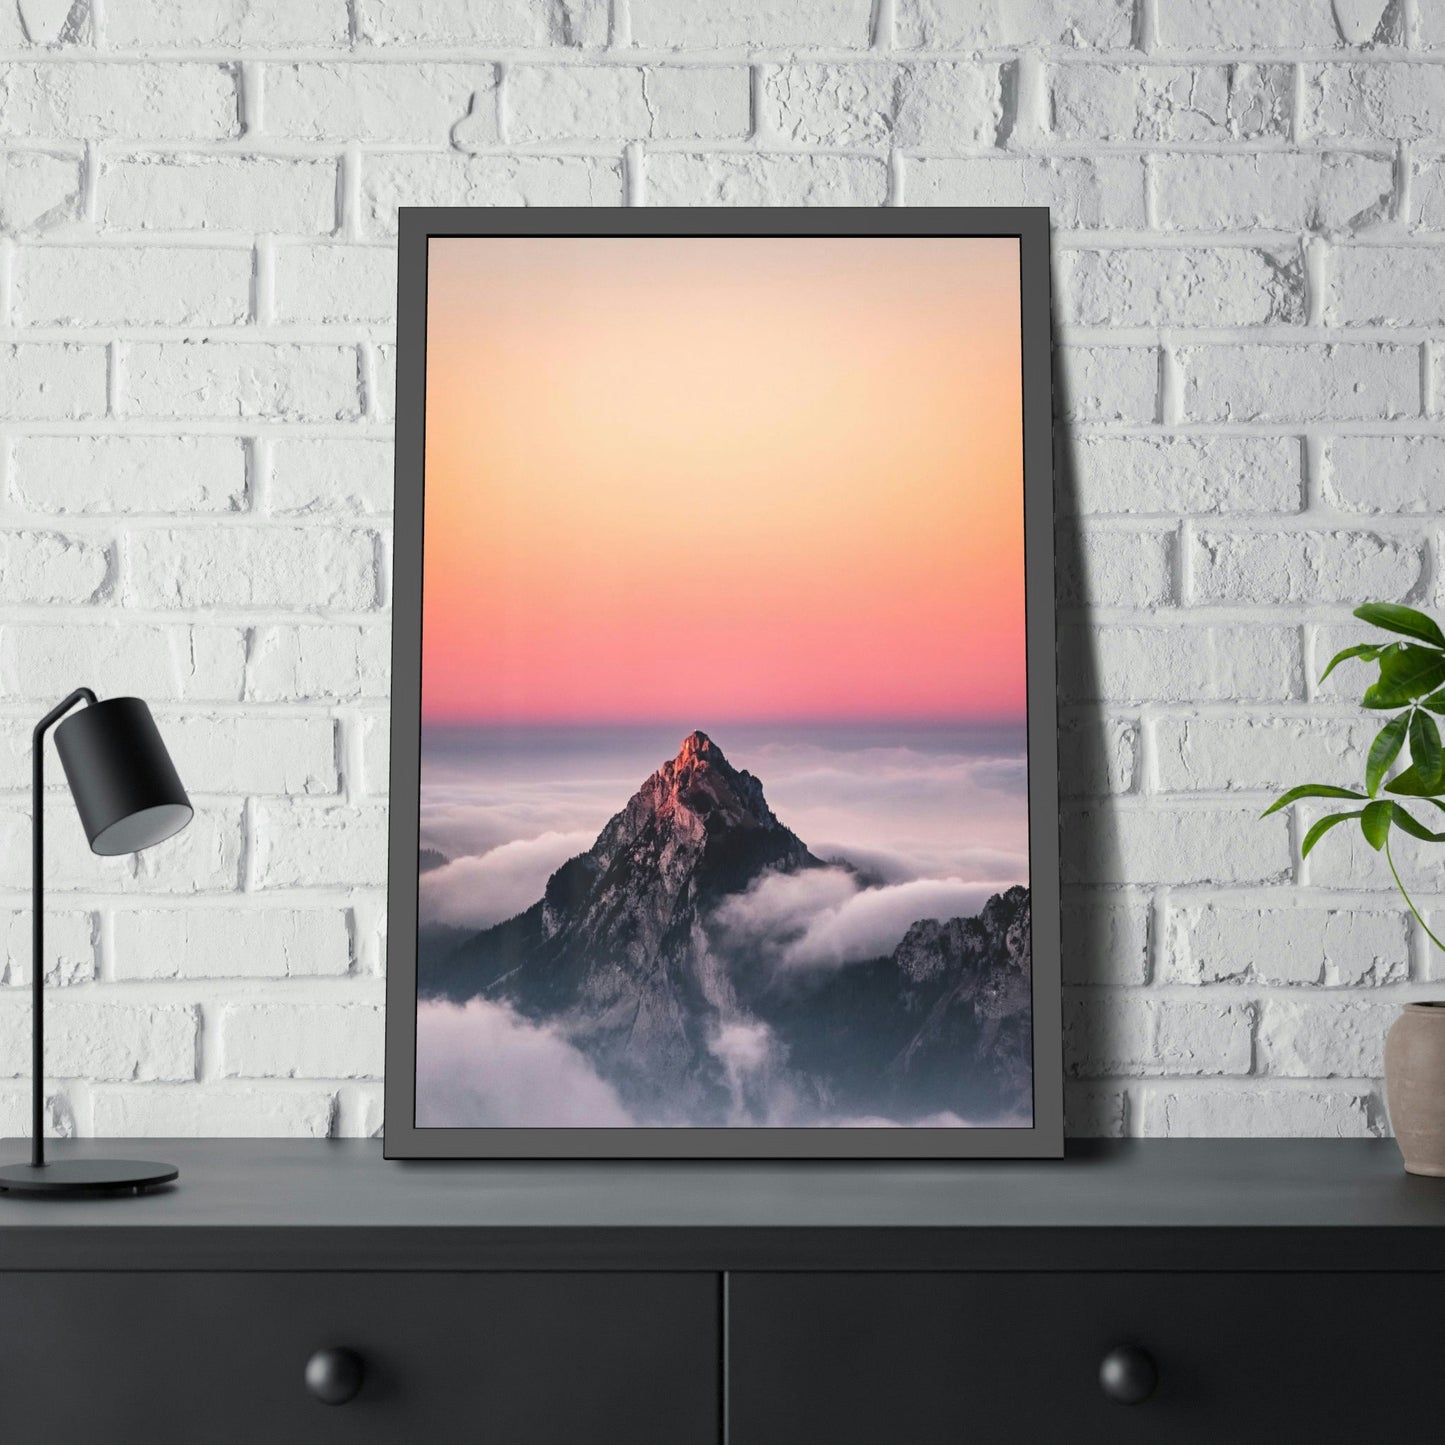 The Majestic Beauty of Mountains: An Interpretation on Canvas